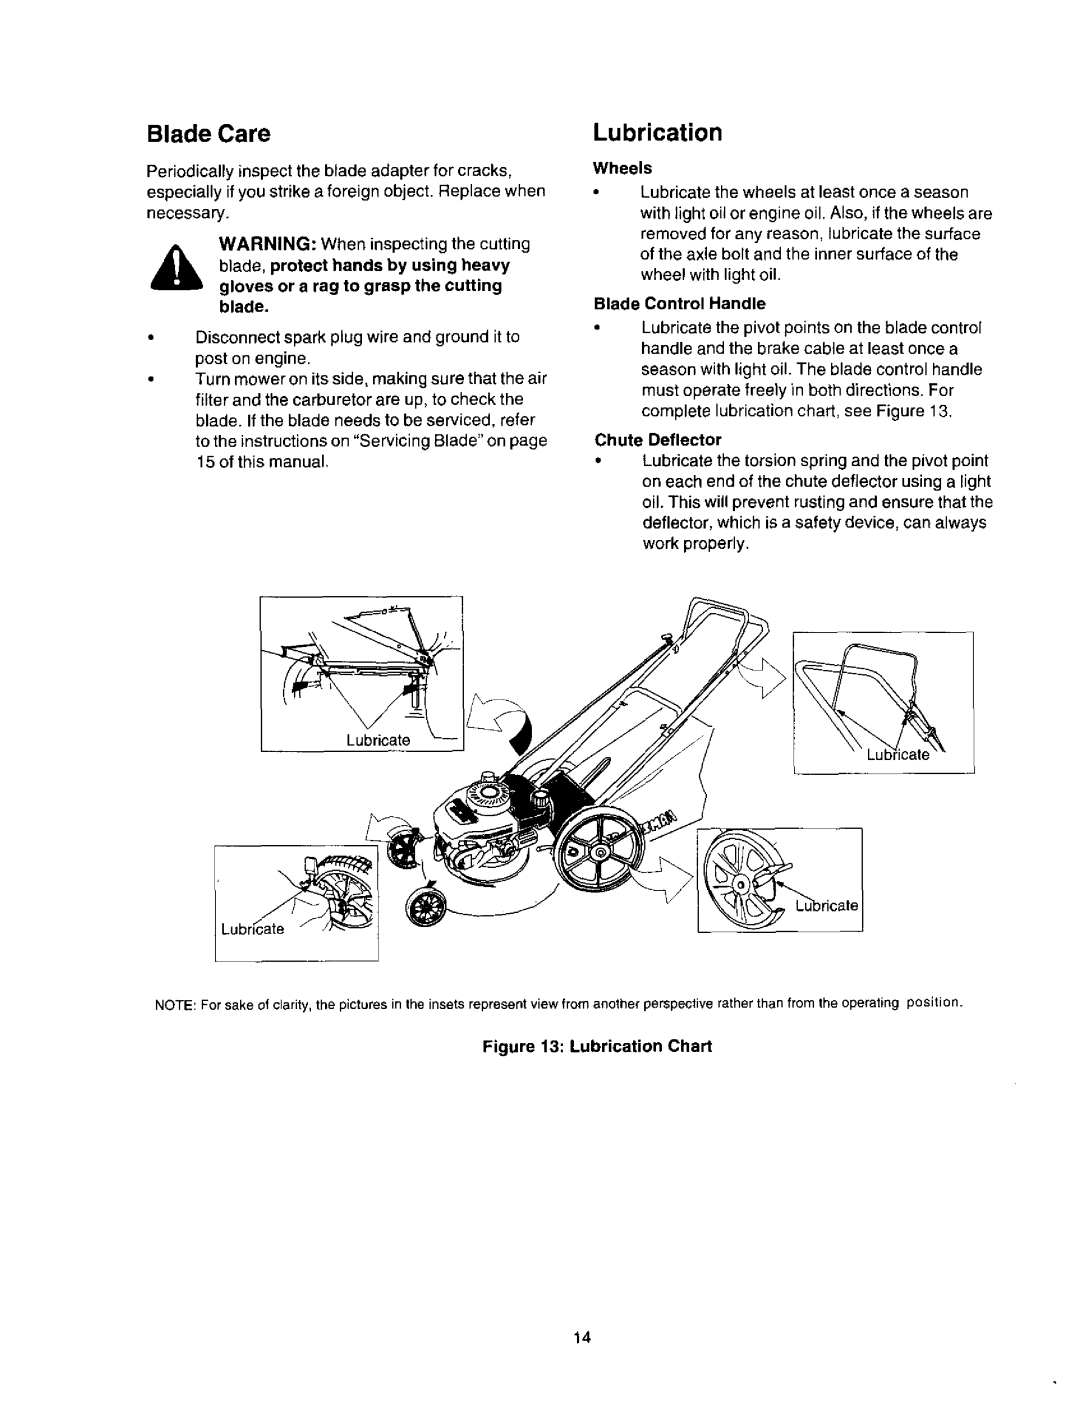 Craftsman 247.388250 owner manual Blade Care, Lubrication, gloves or a rag to grasp the cutting blade, Chute Deflector 